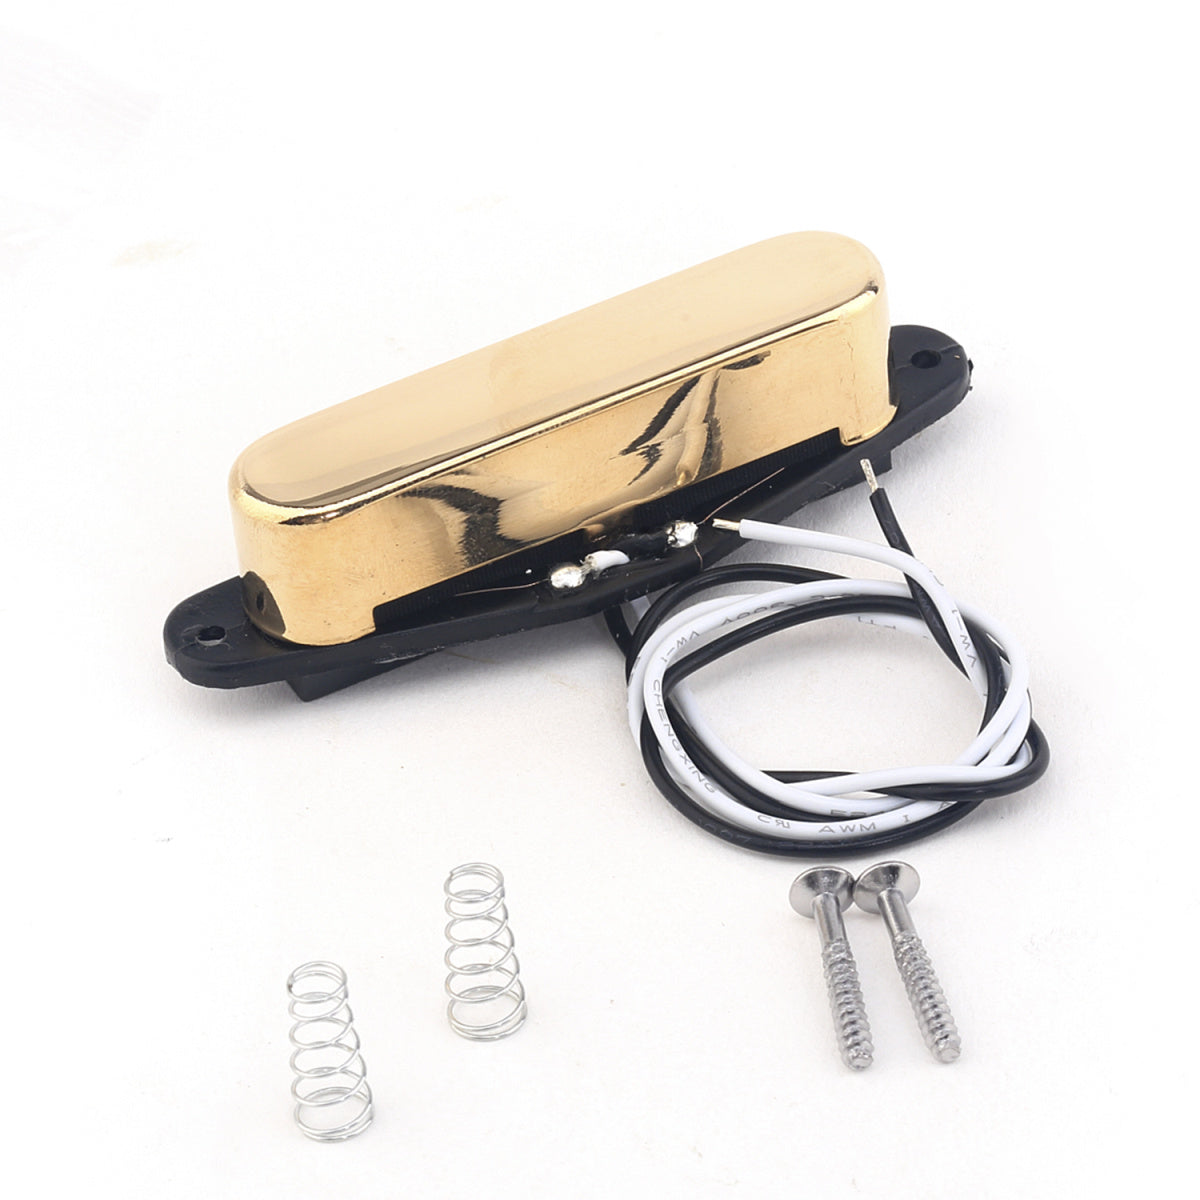 Musiclily Pro 50mm Single Coil Pickup for Telecaster Tele Guitar Neck, Gold